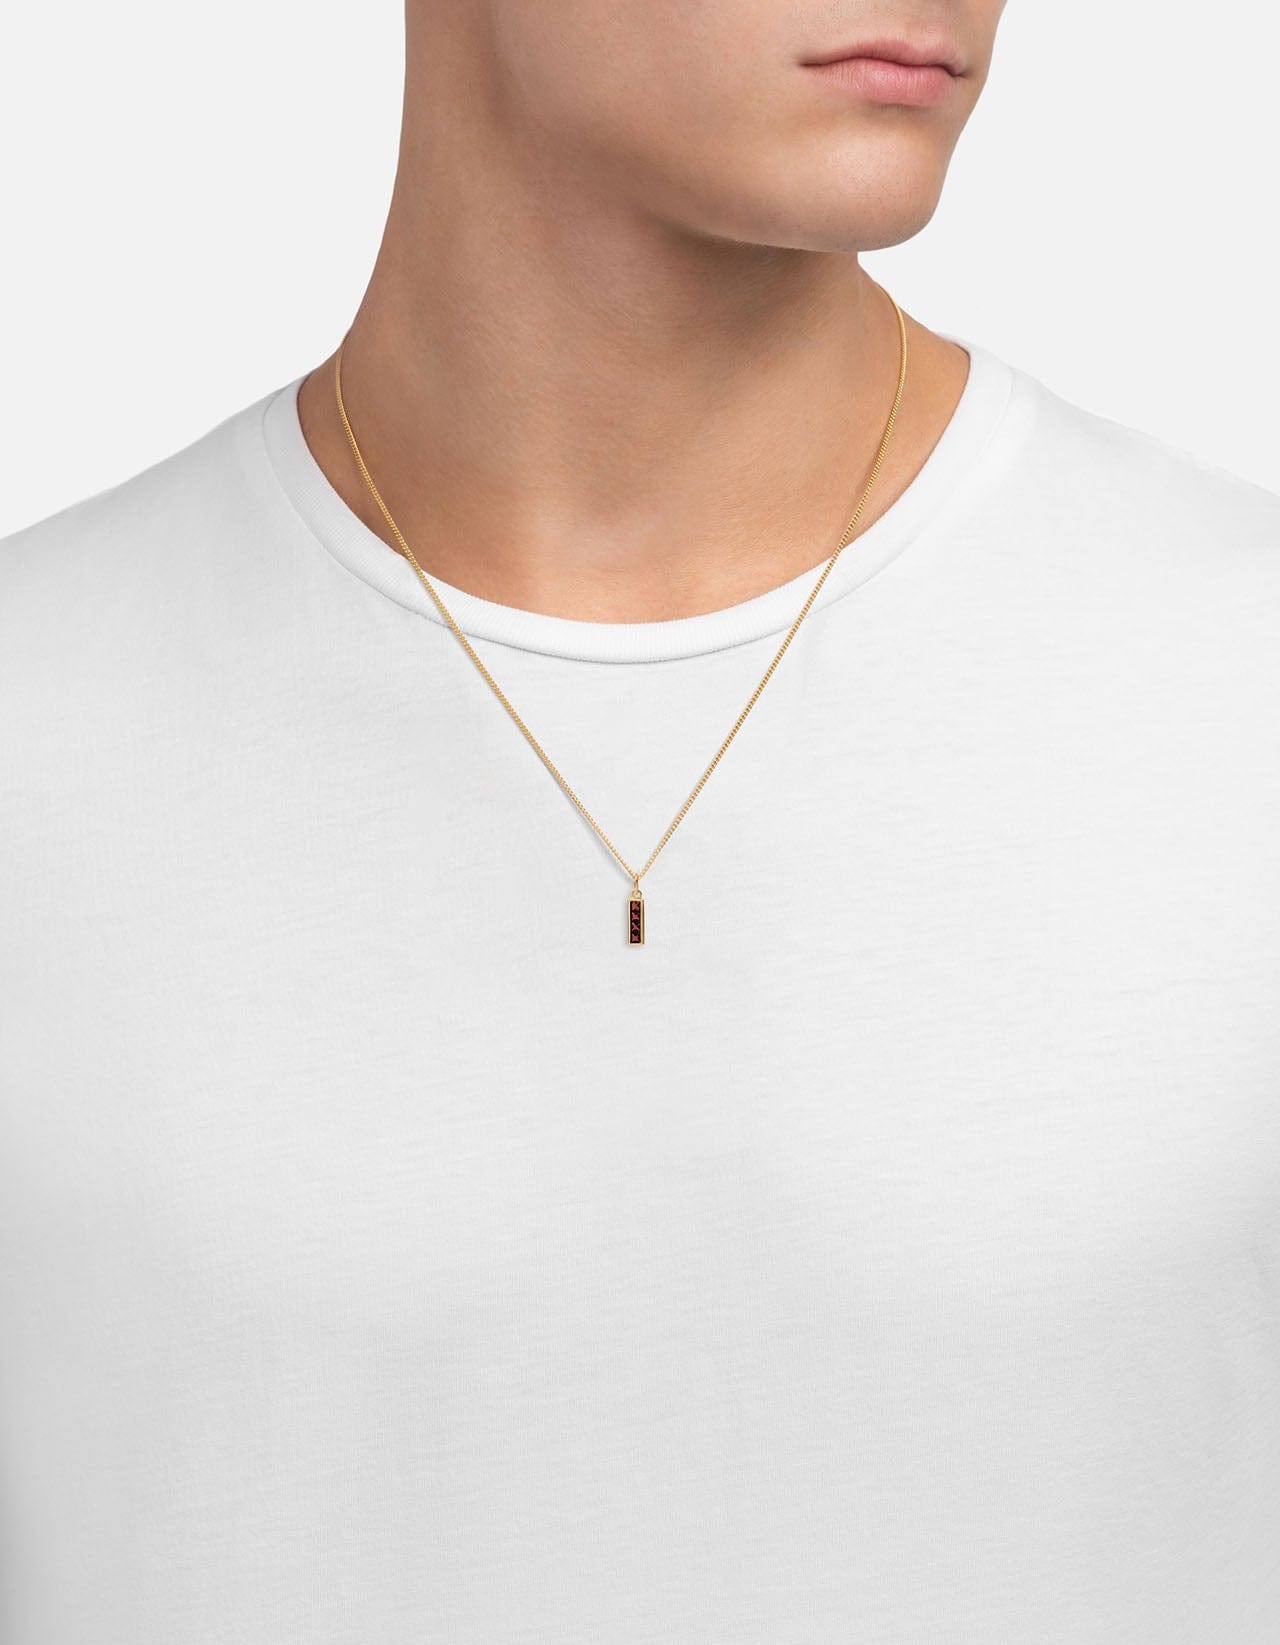 Buy Men Style High Quality Jesus Cross Shape Silver And Red Stainless Steel  Square Necklace Pendant For Men And Boys Online at Low Prices in India -  Paytmmall.com